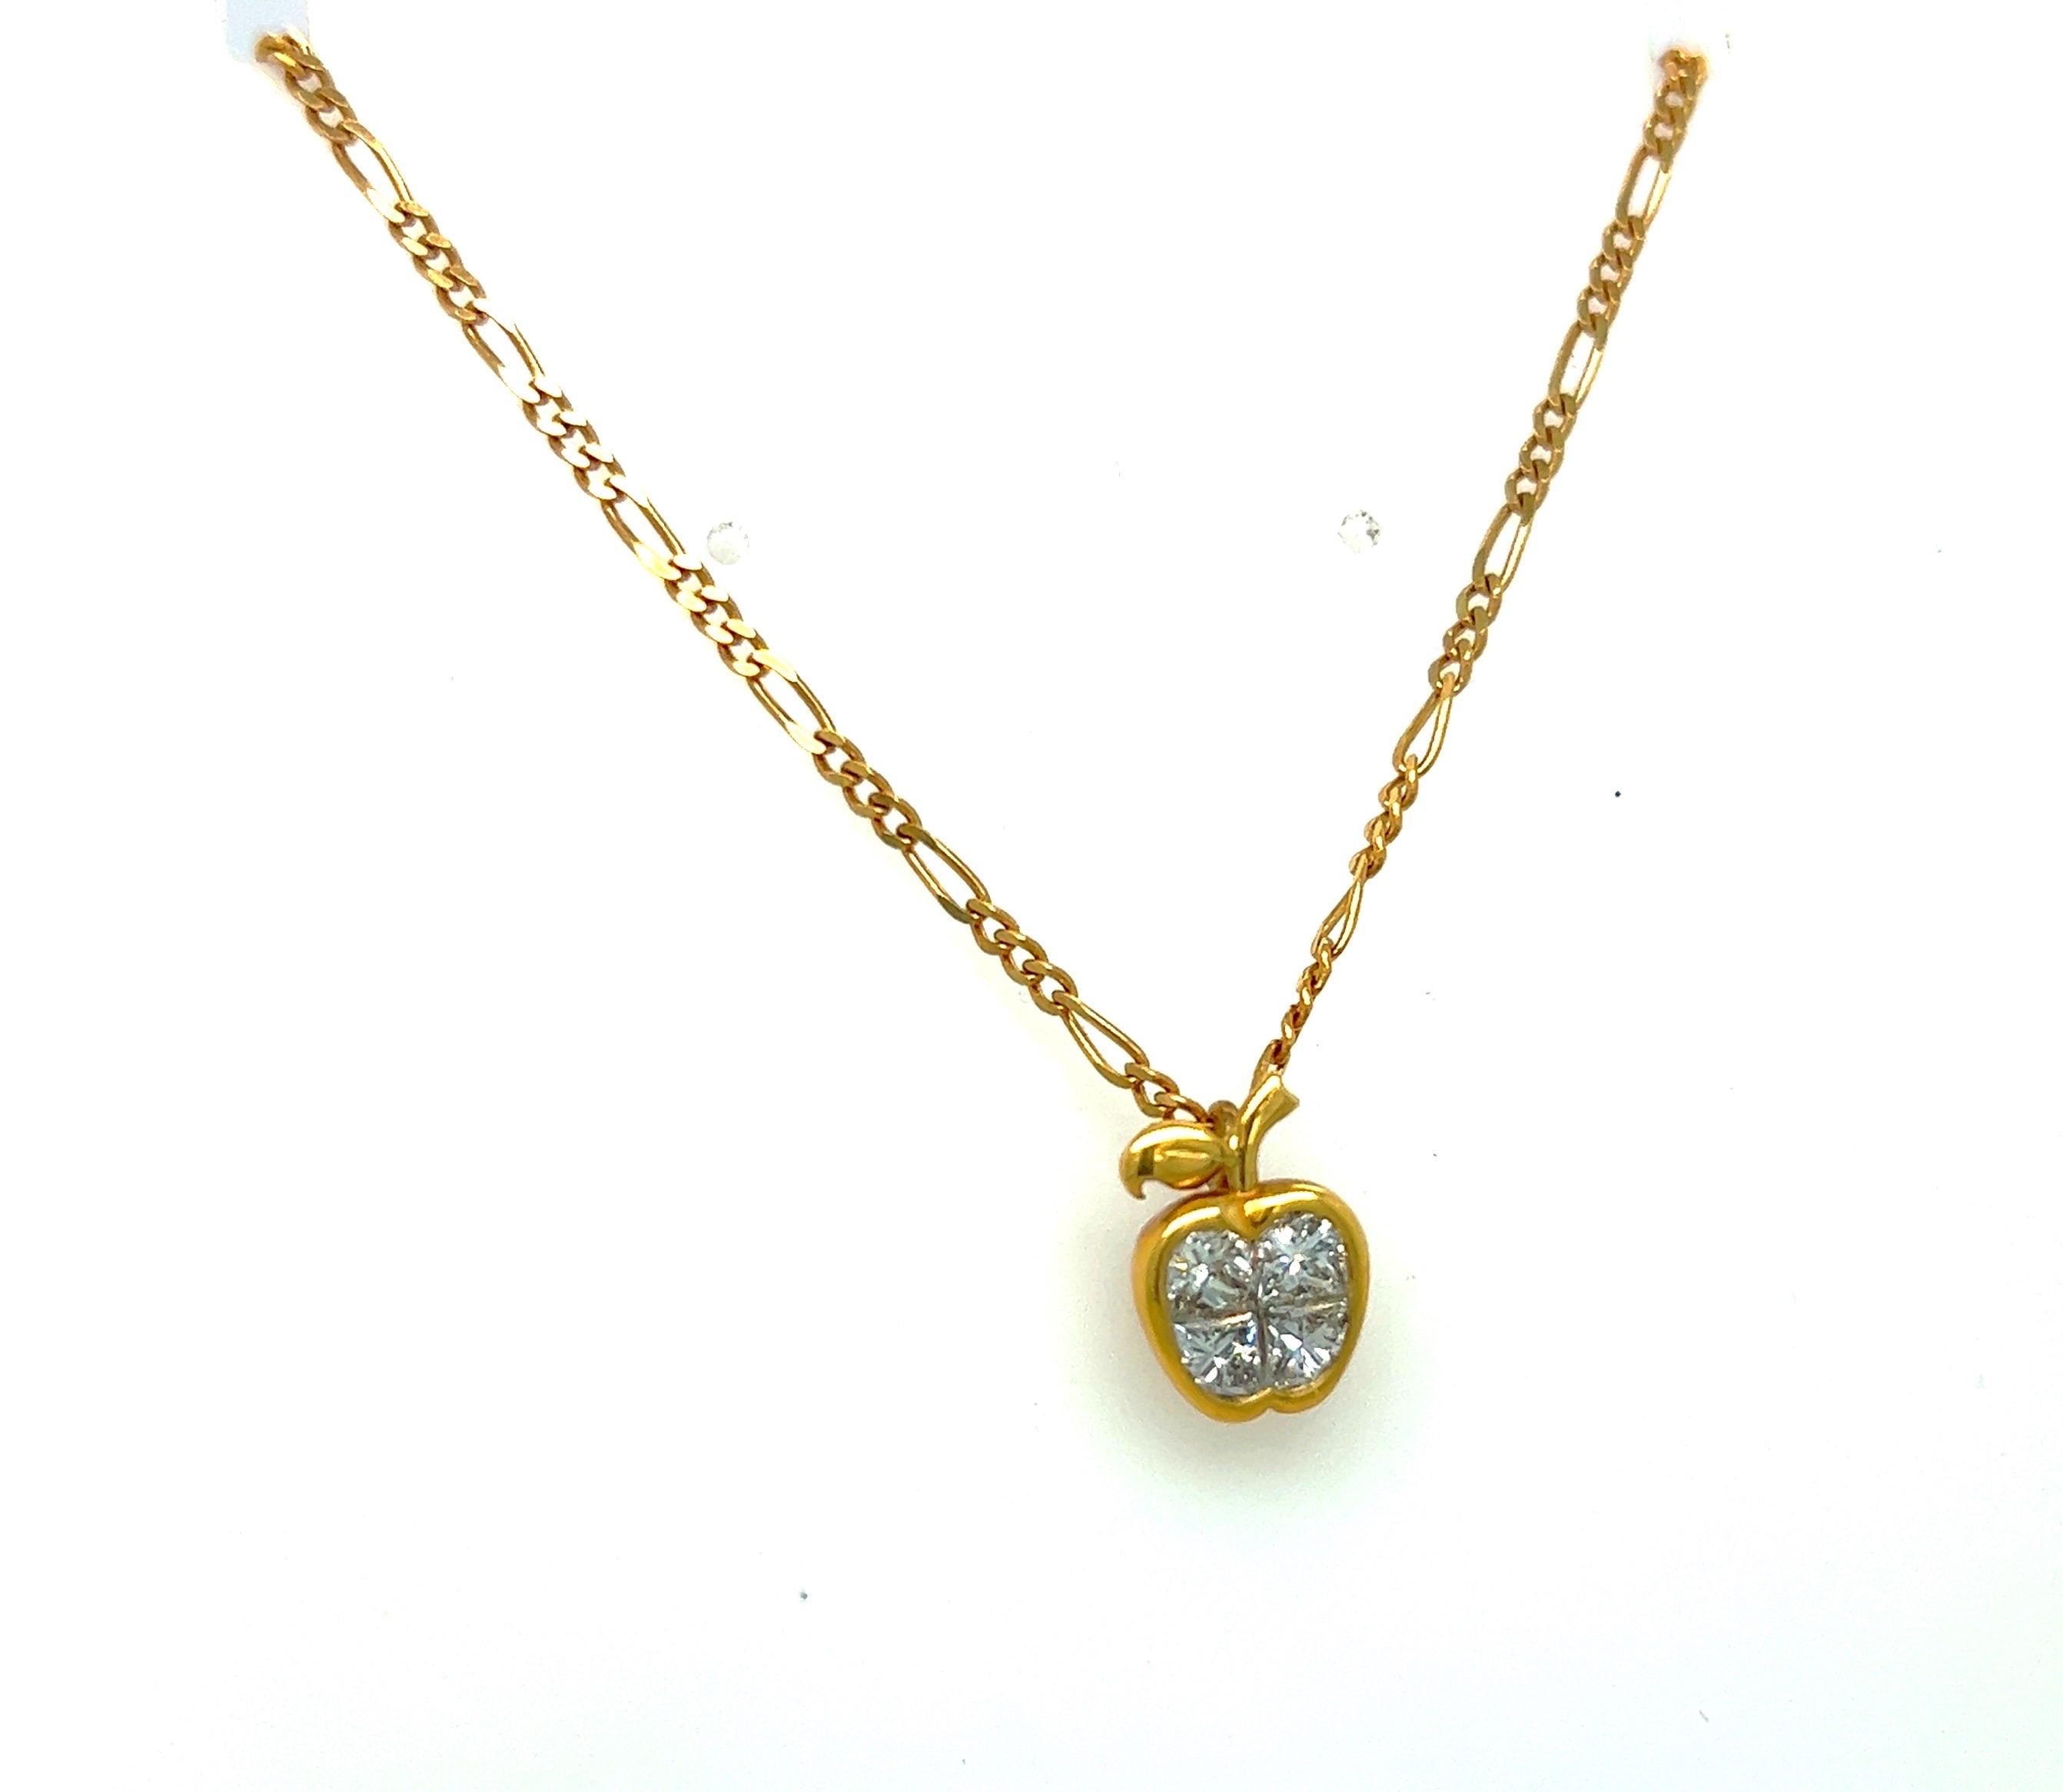 I Love New York
18 karat yellow gold apple pendant. The apple is invisibly set with 4 princess cut diamonds, weighing 0.85 carats. The apple measures 1/2